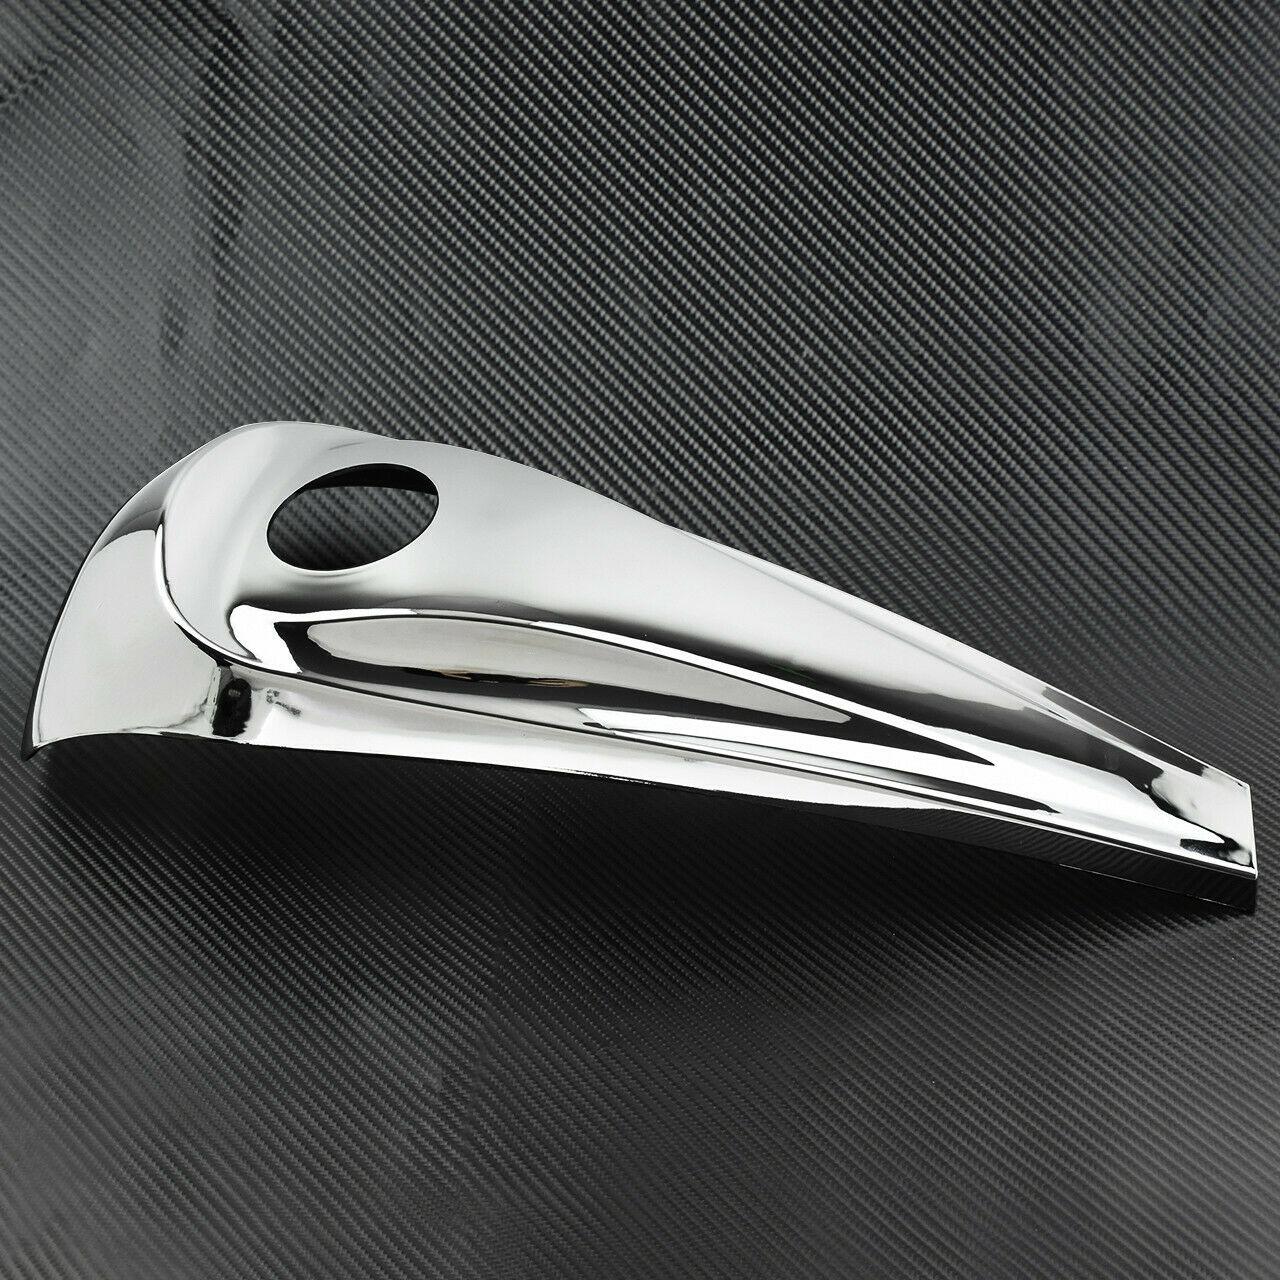 Chrome Dash Fuel Console Cover + Gas Tank Cap Screw Fit For Harley Touring 08-20 - Moto Life Products